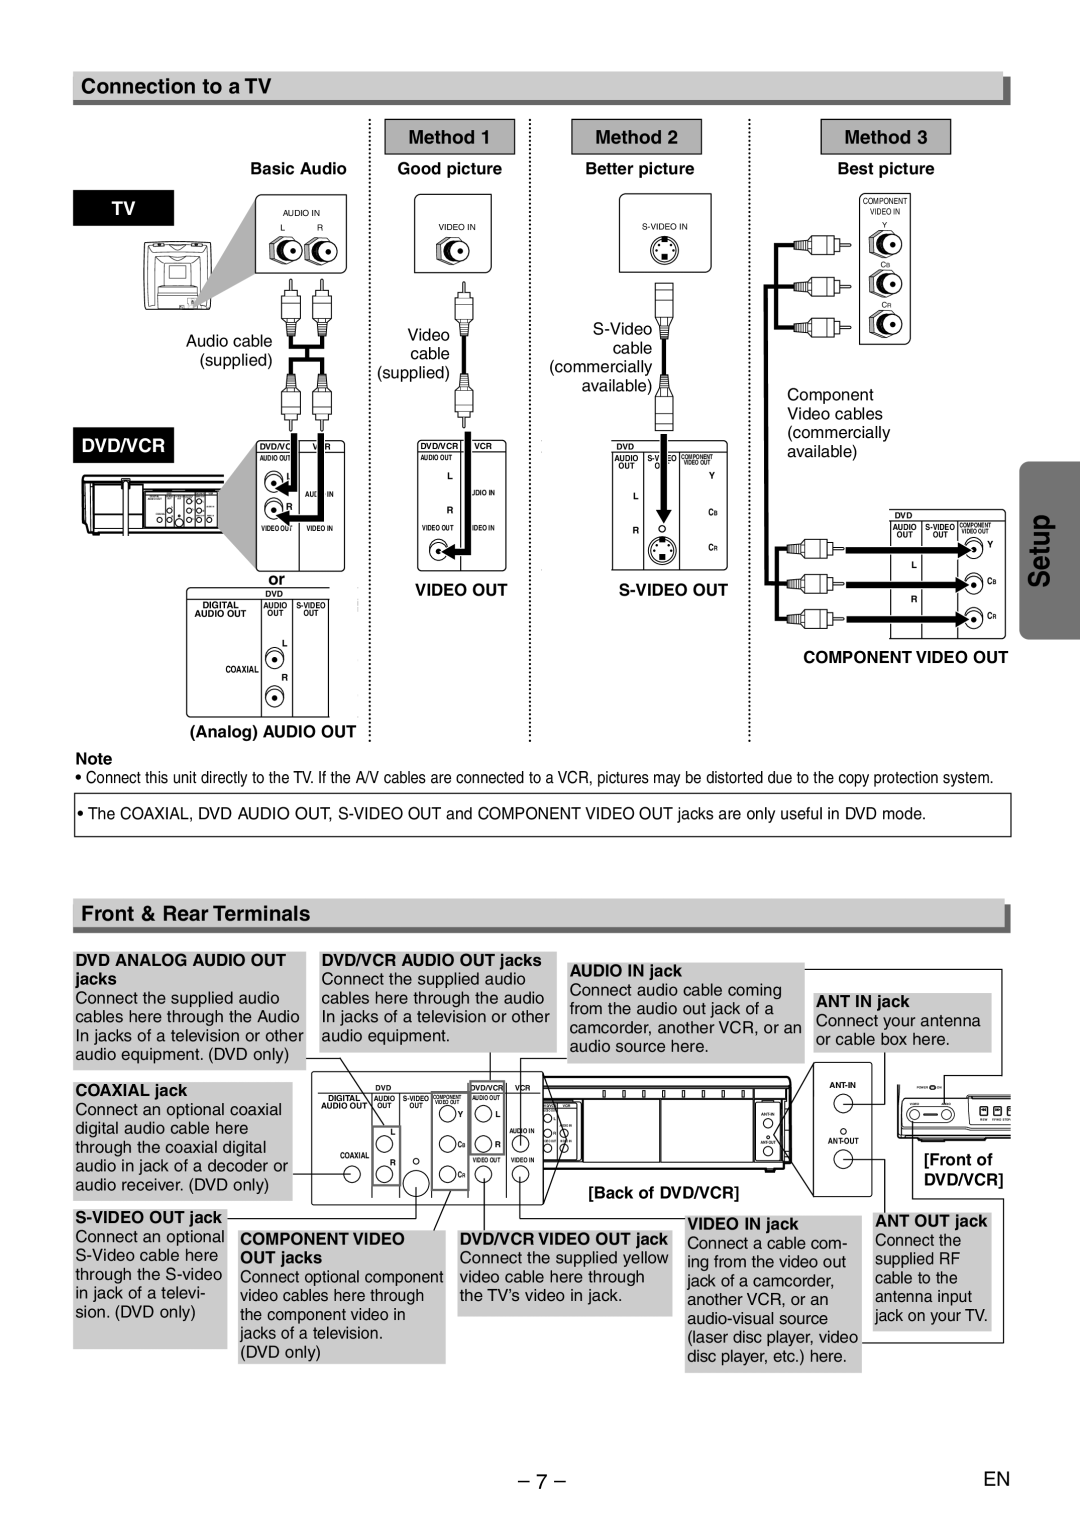 Magnavox MSD804 owner manual Connection to a TV, Front & Rear Terminals, Method 